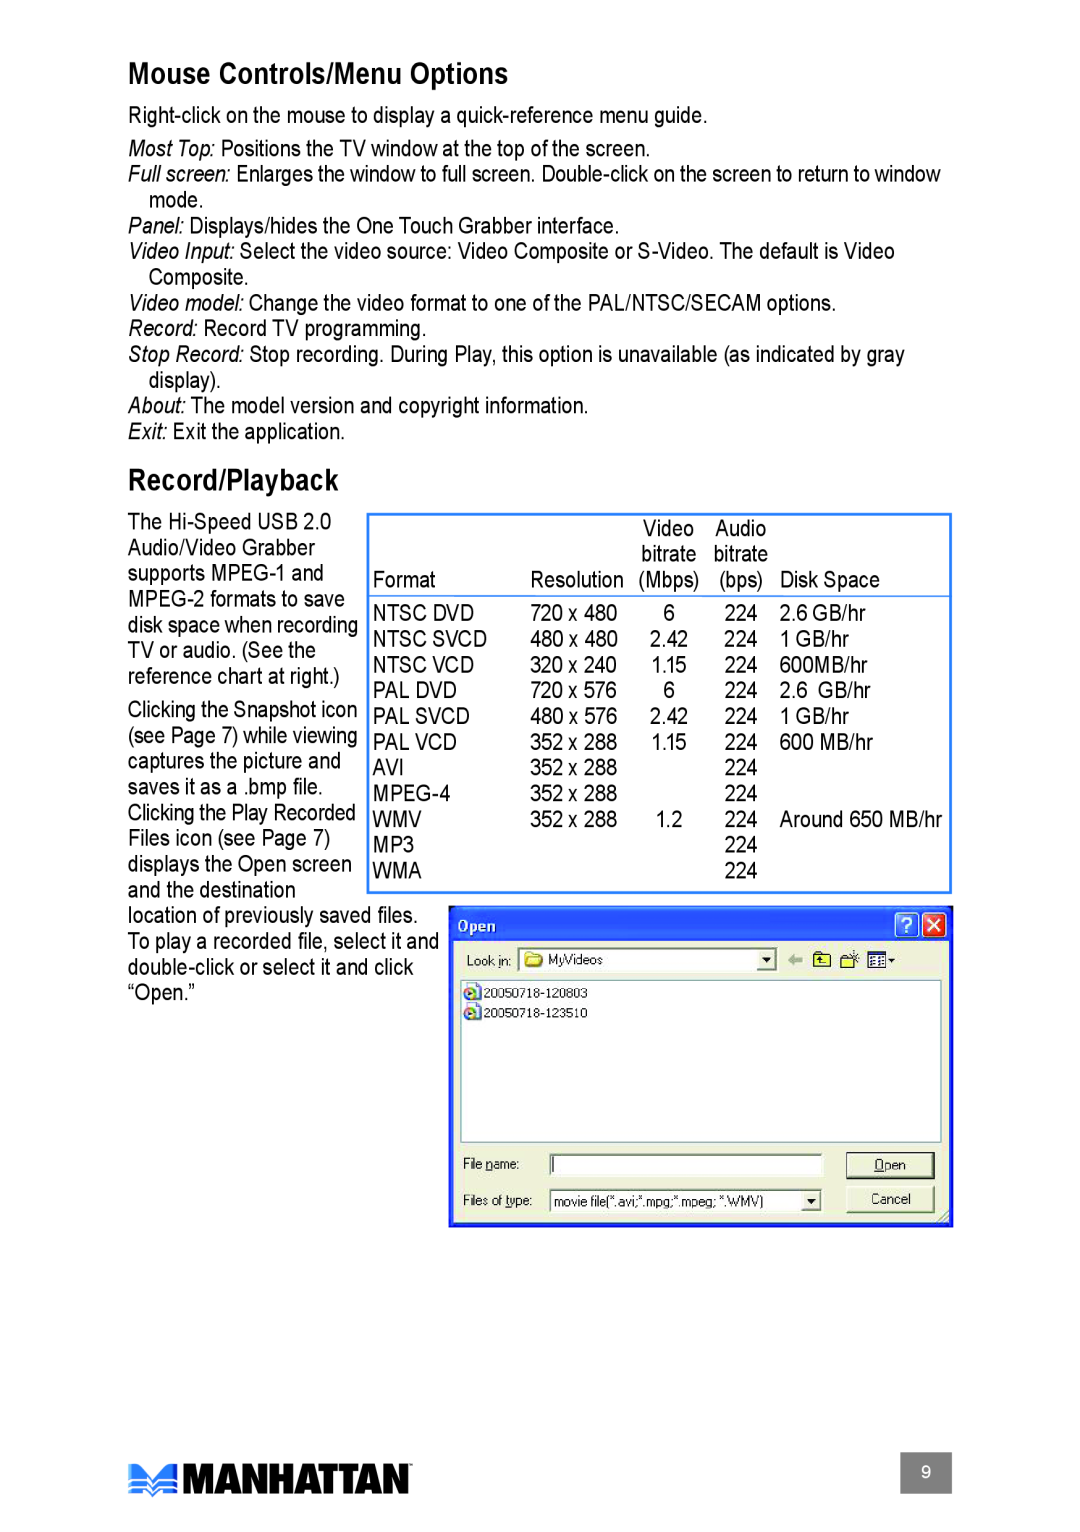 Manhattan Computer Products 164115 user manual Mouse Controls/Menu Options, Record/Playback, saves it as a .bmp file 